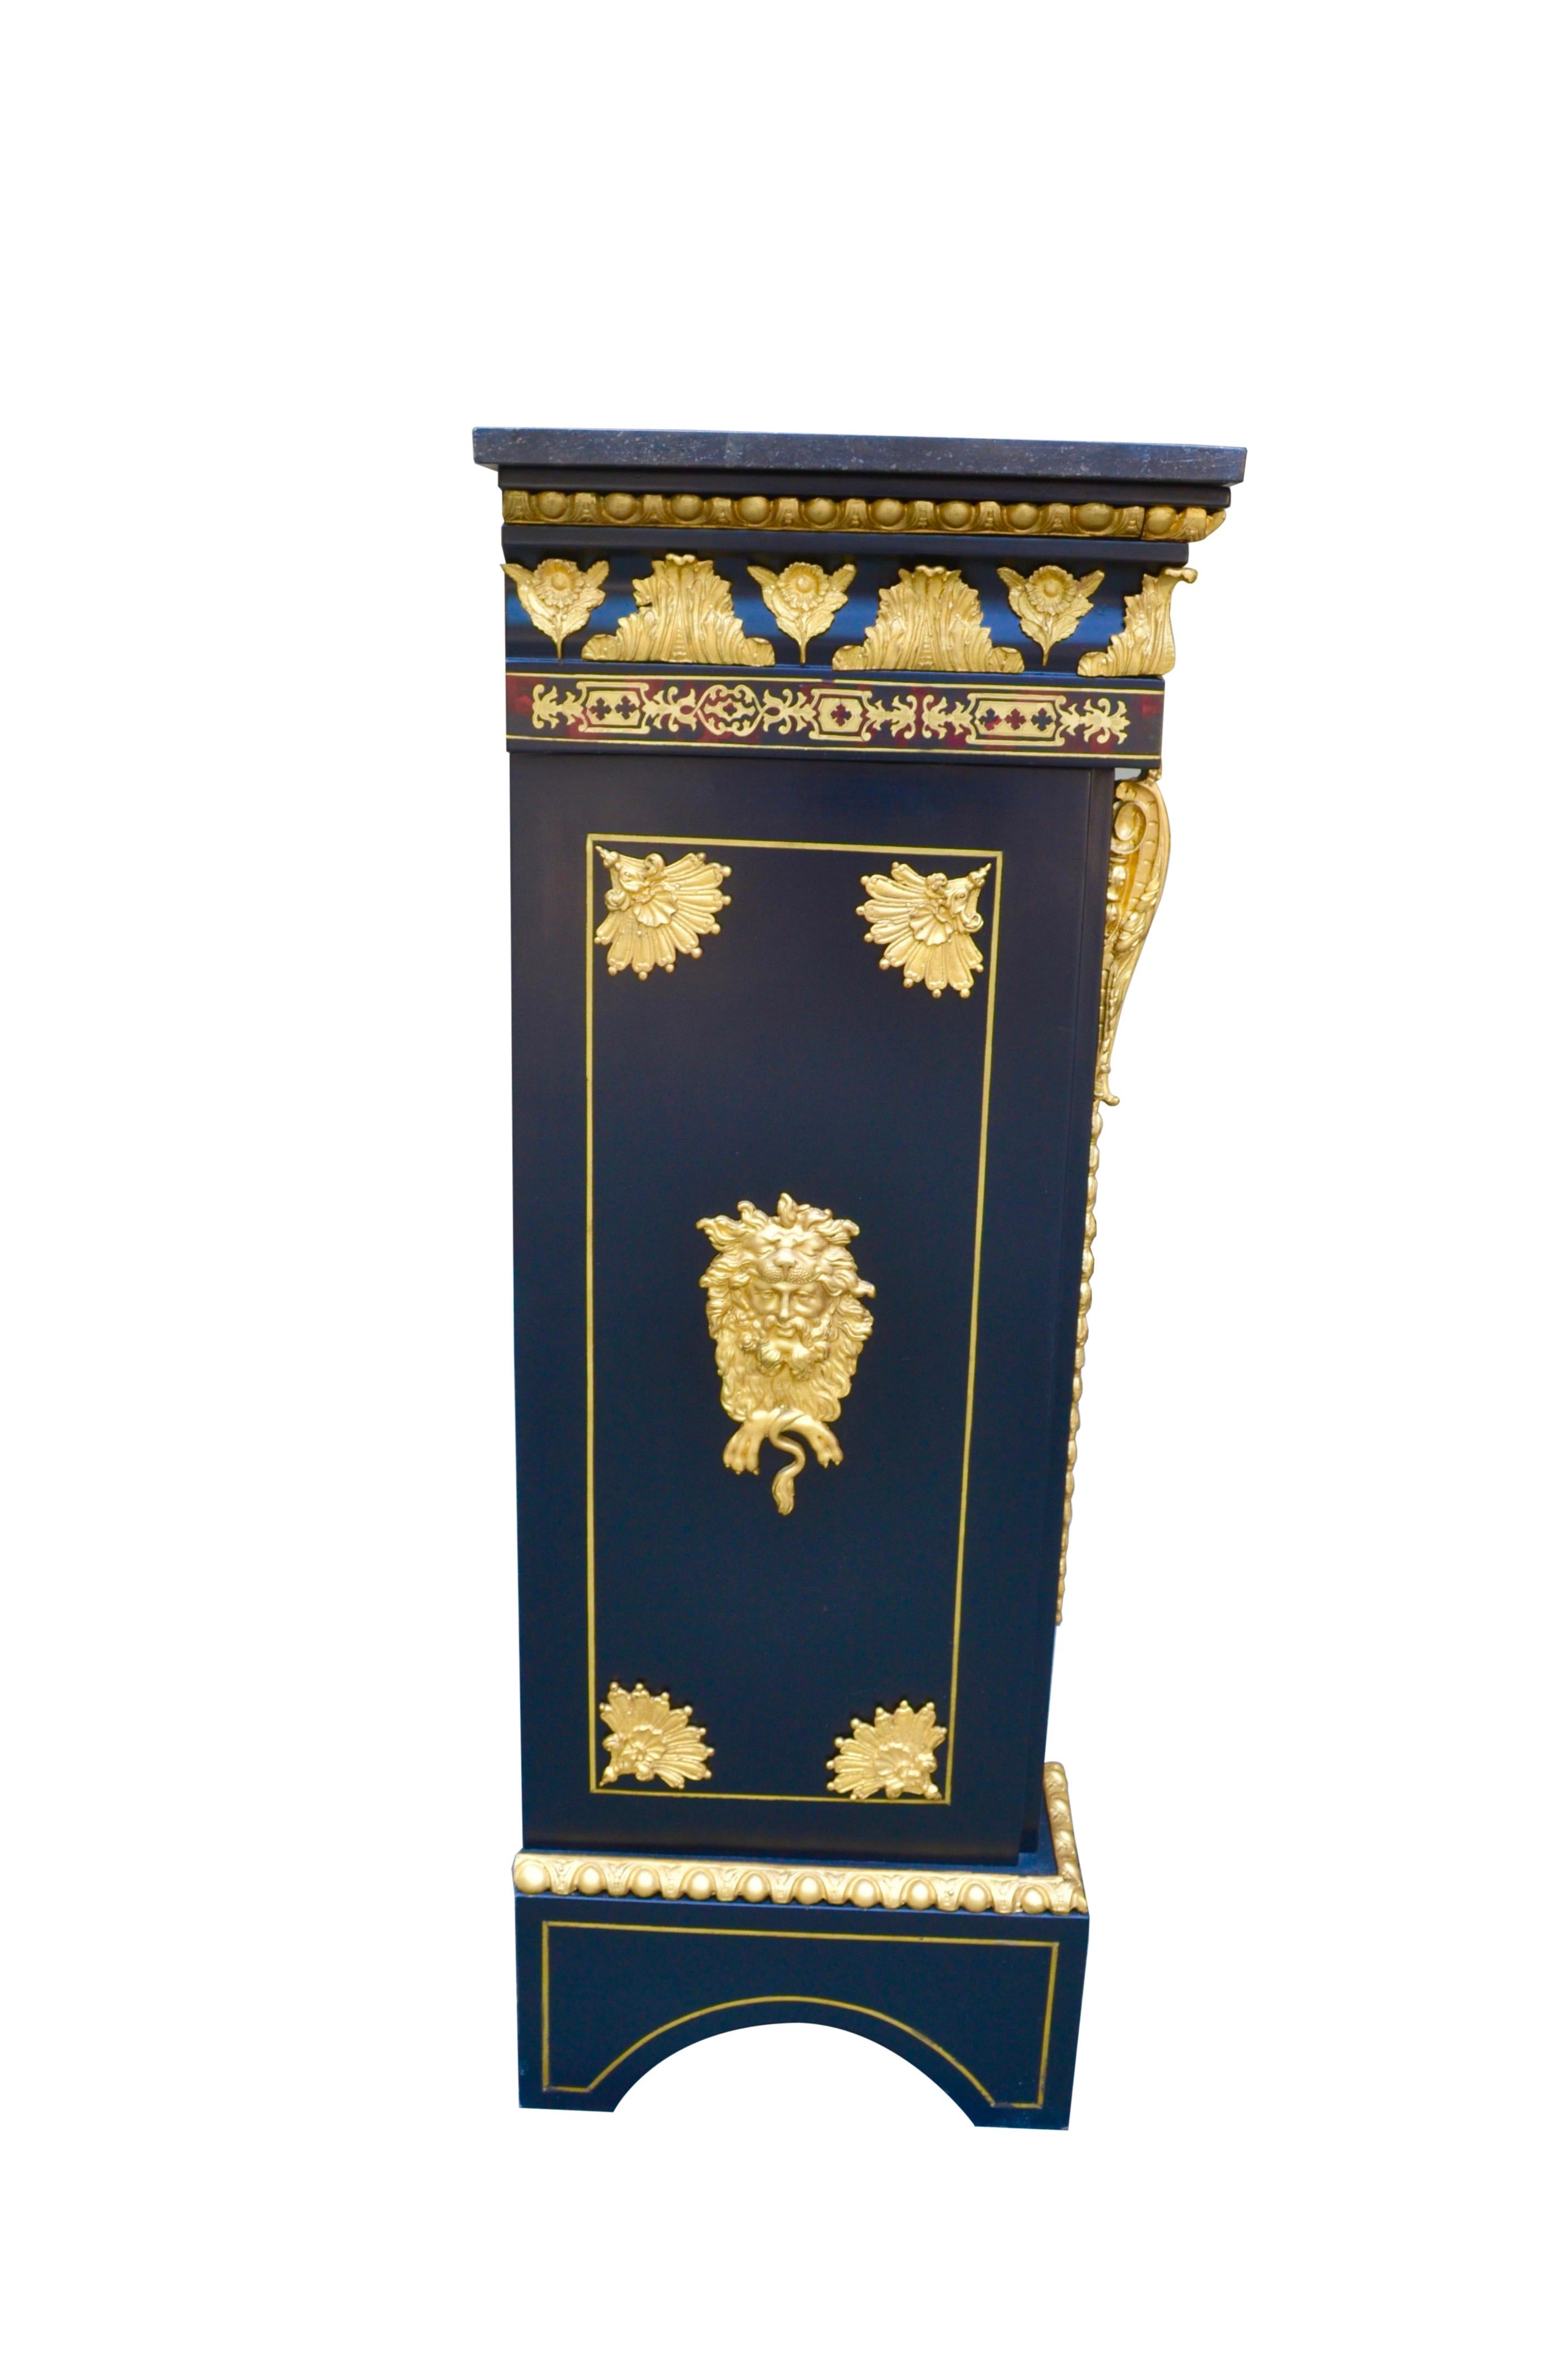 19th Century Napoleon III Ebonized and Brass Inlaid Cabinet In Good Condition For Sale In Vancouver, British Columbia